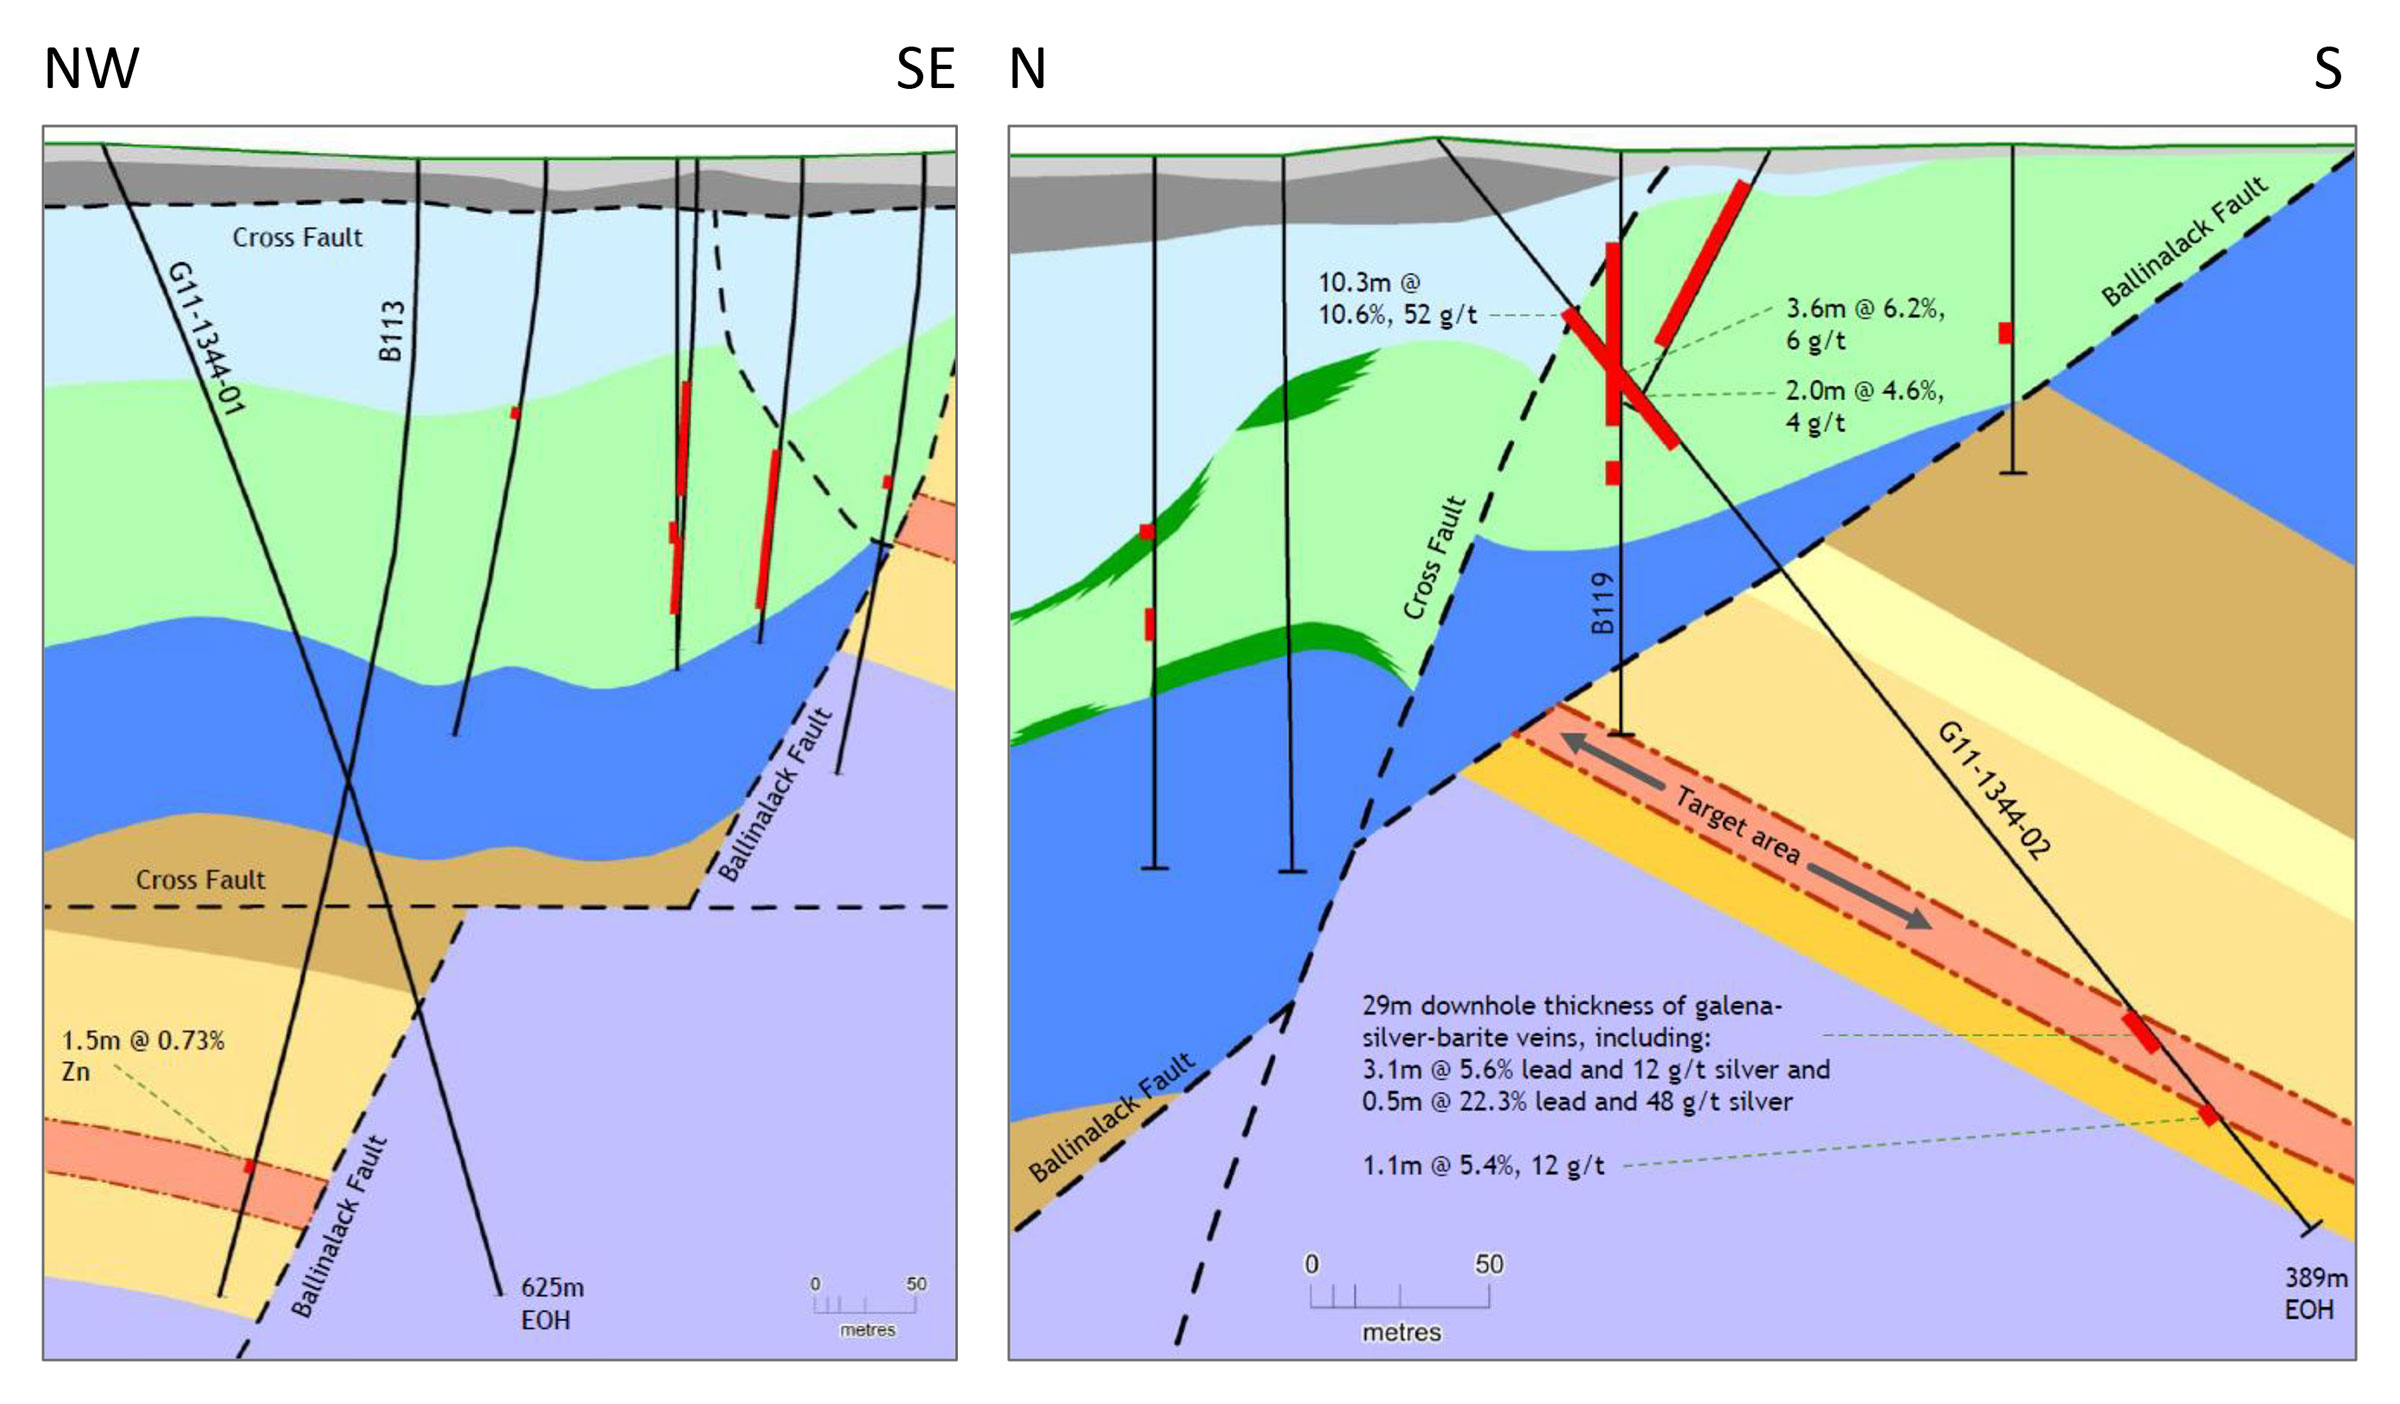 Identified Cross-Faults, Interpreted Ballinalack Fault to be Steeper and Verified Known Mineralization